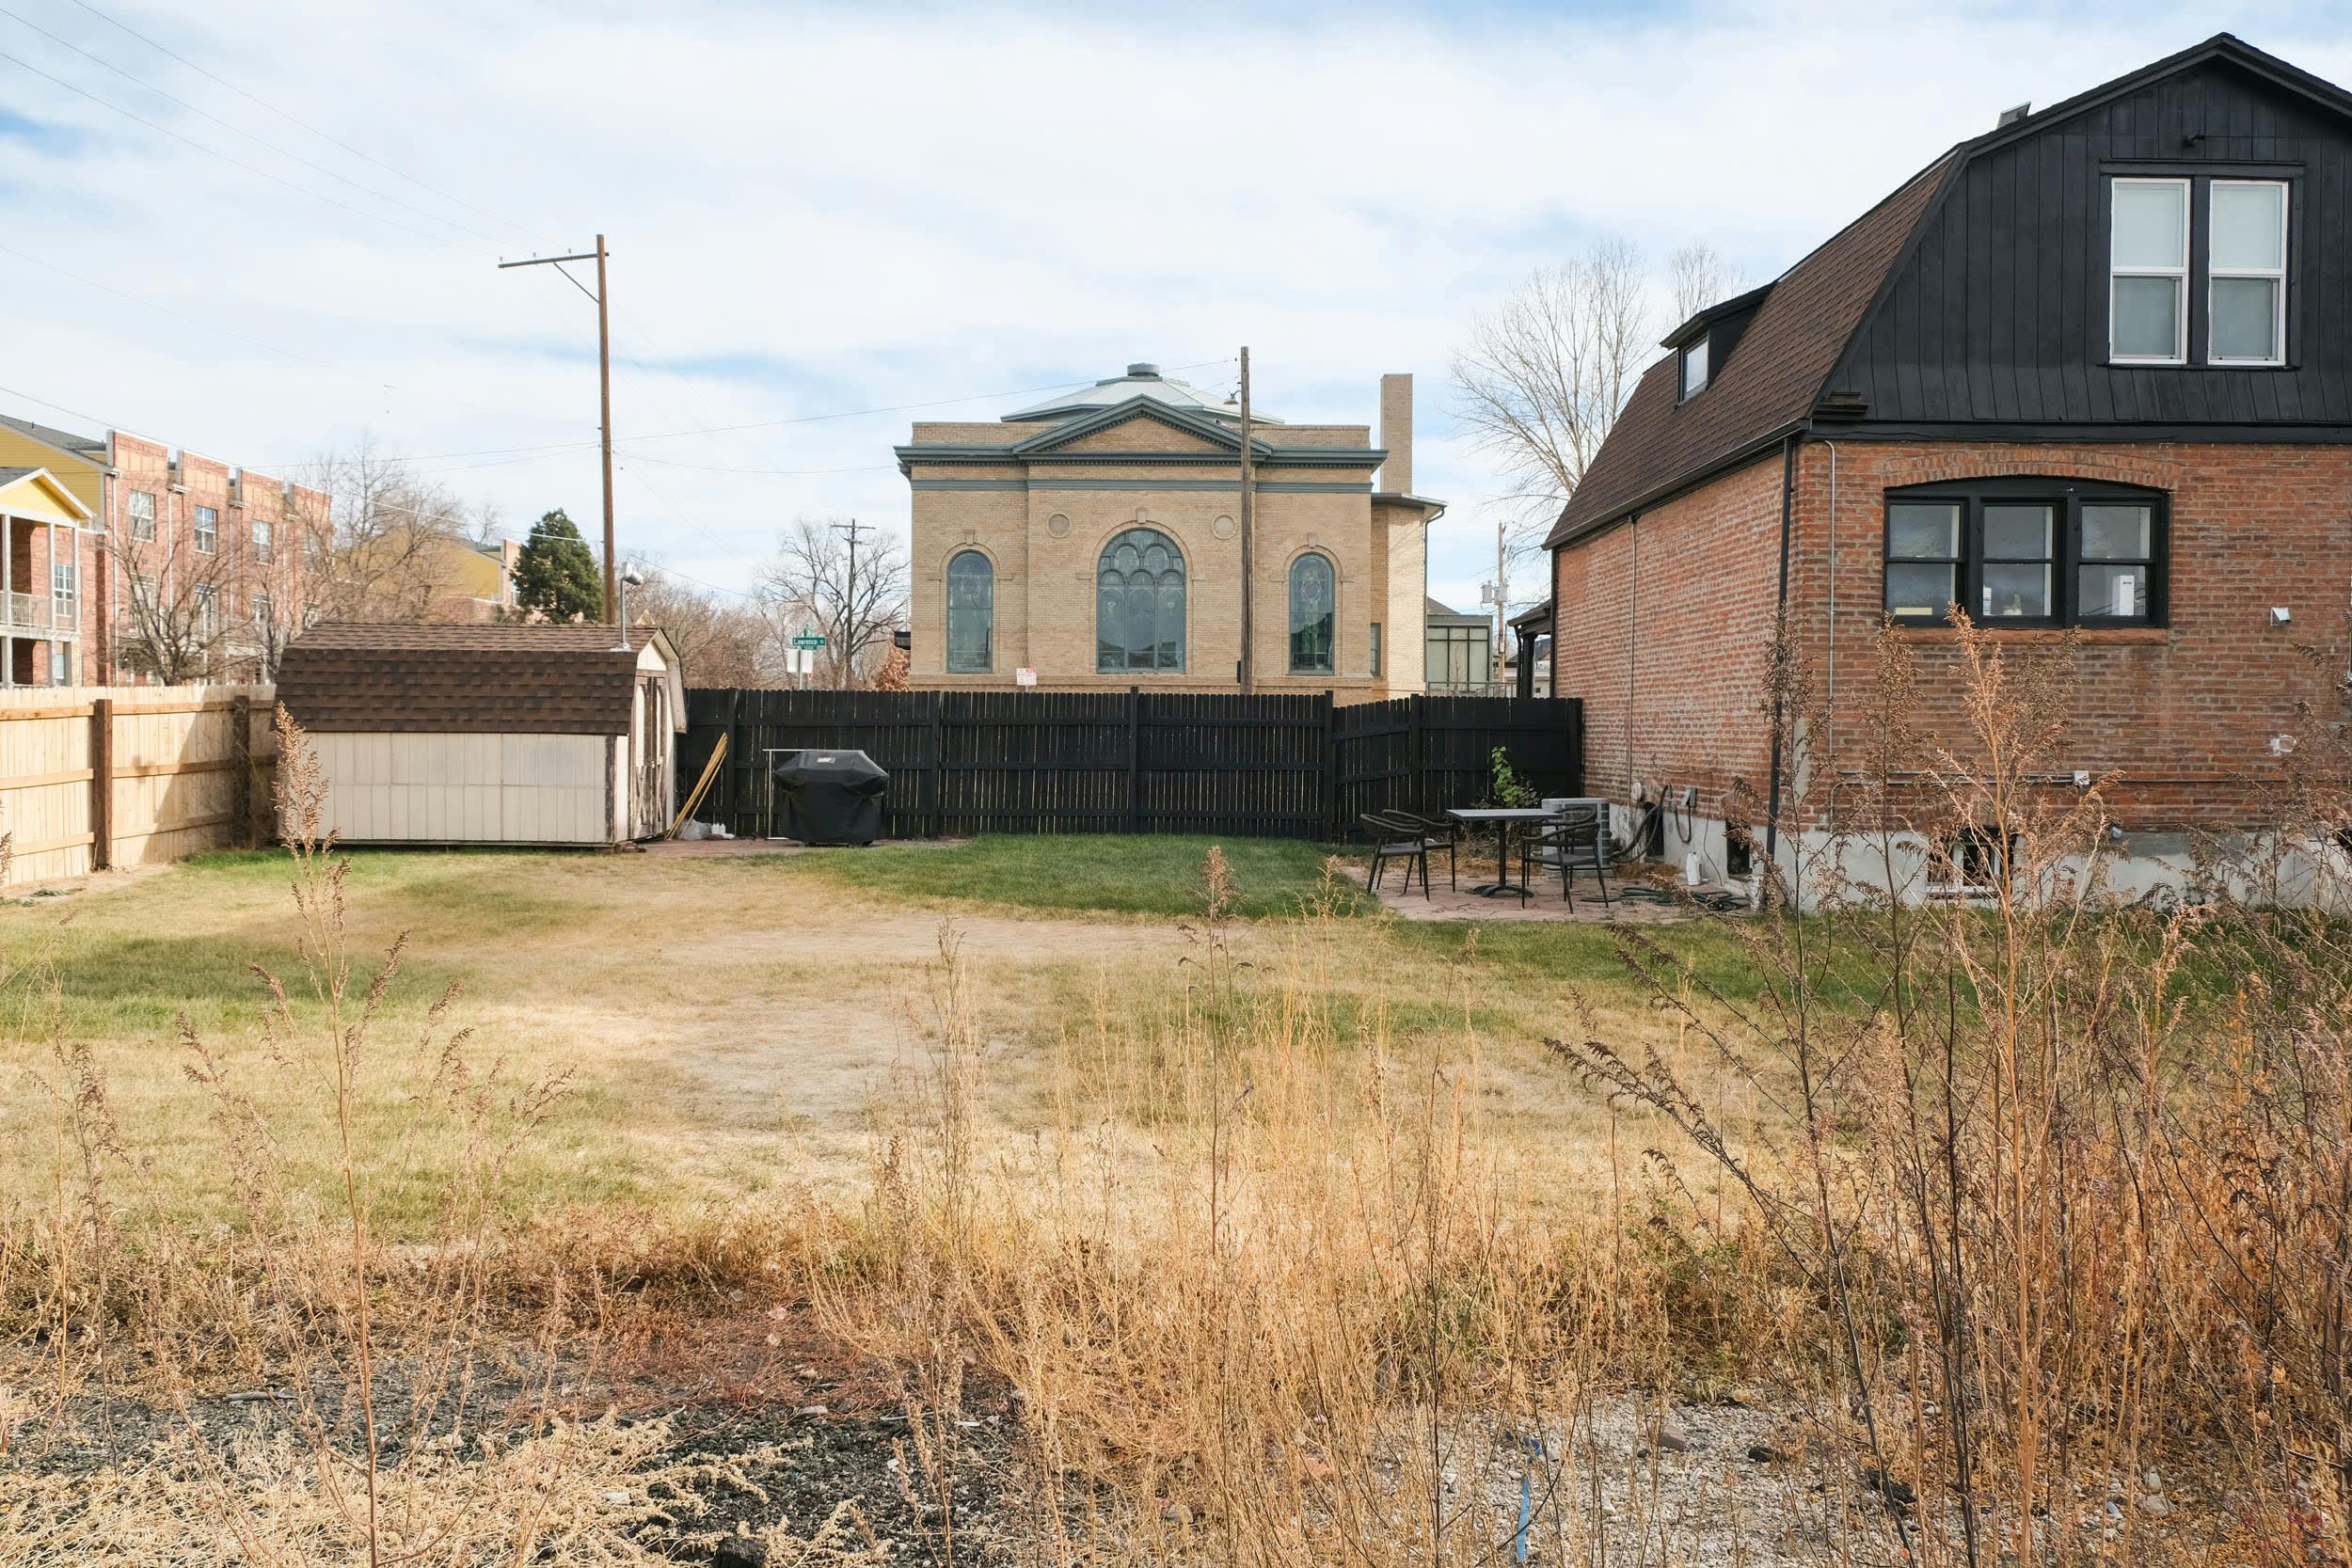 a vacant lot with a church in the background and a building in the foreground with tall grass in front of it